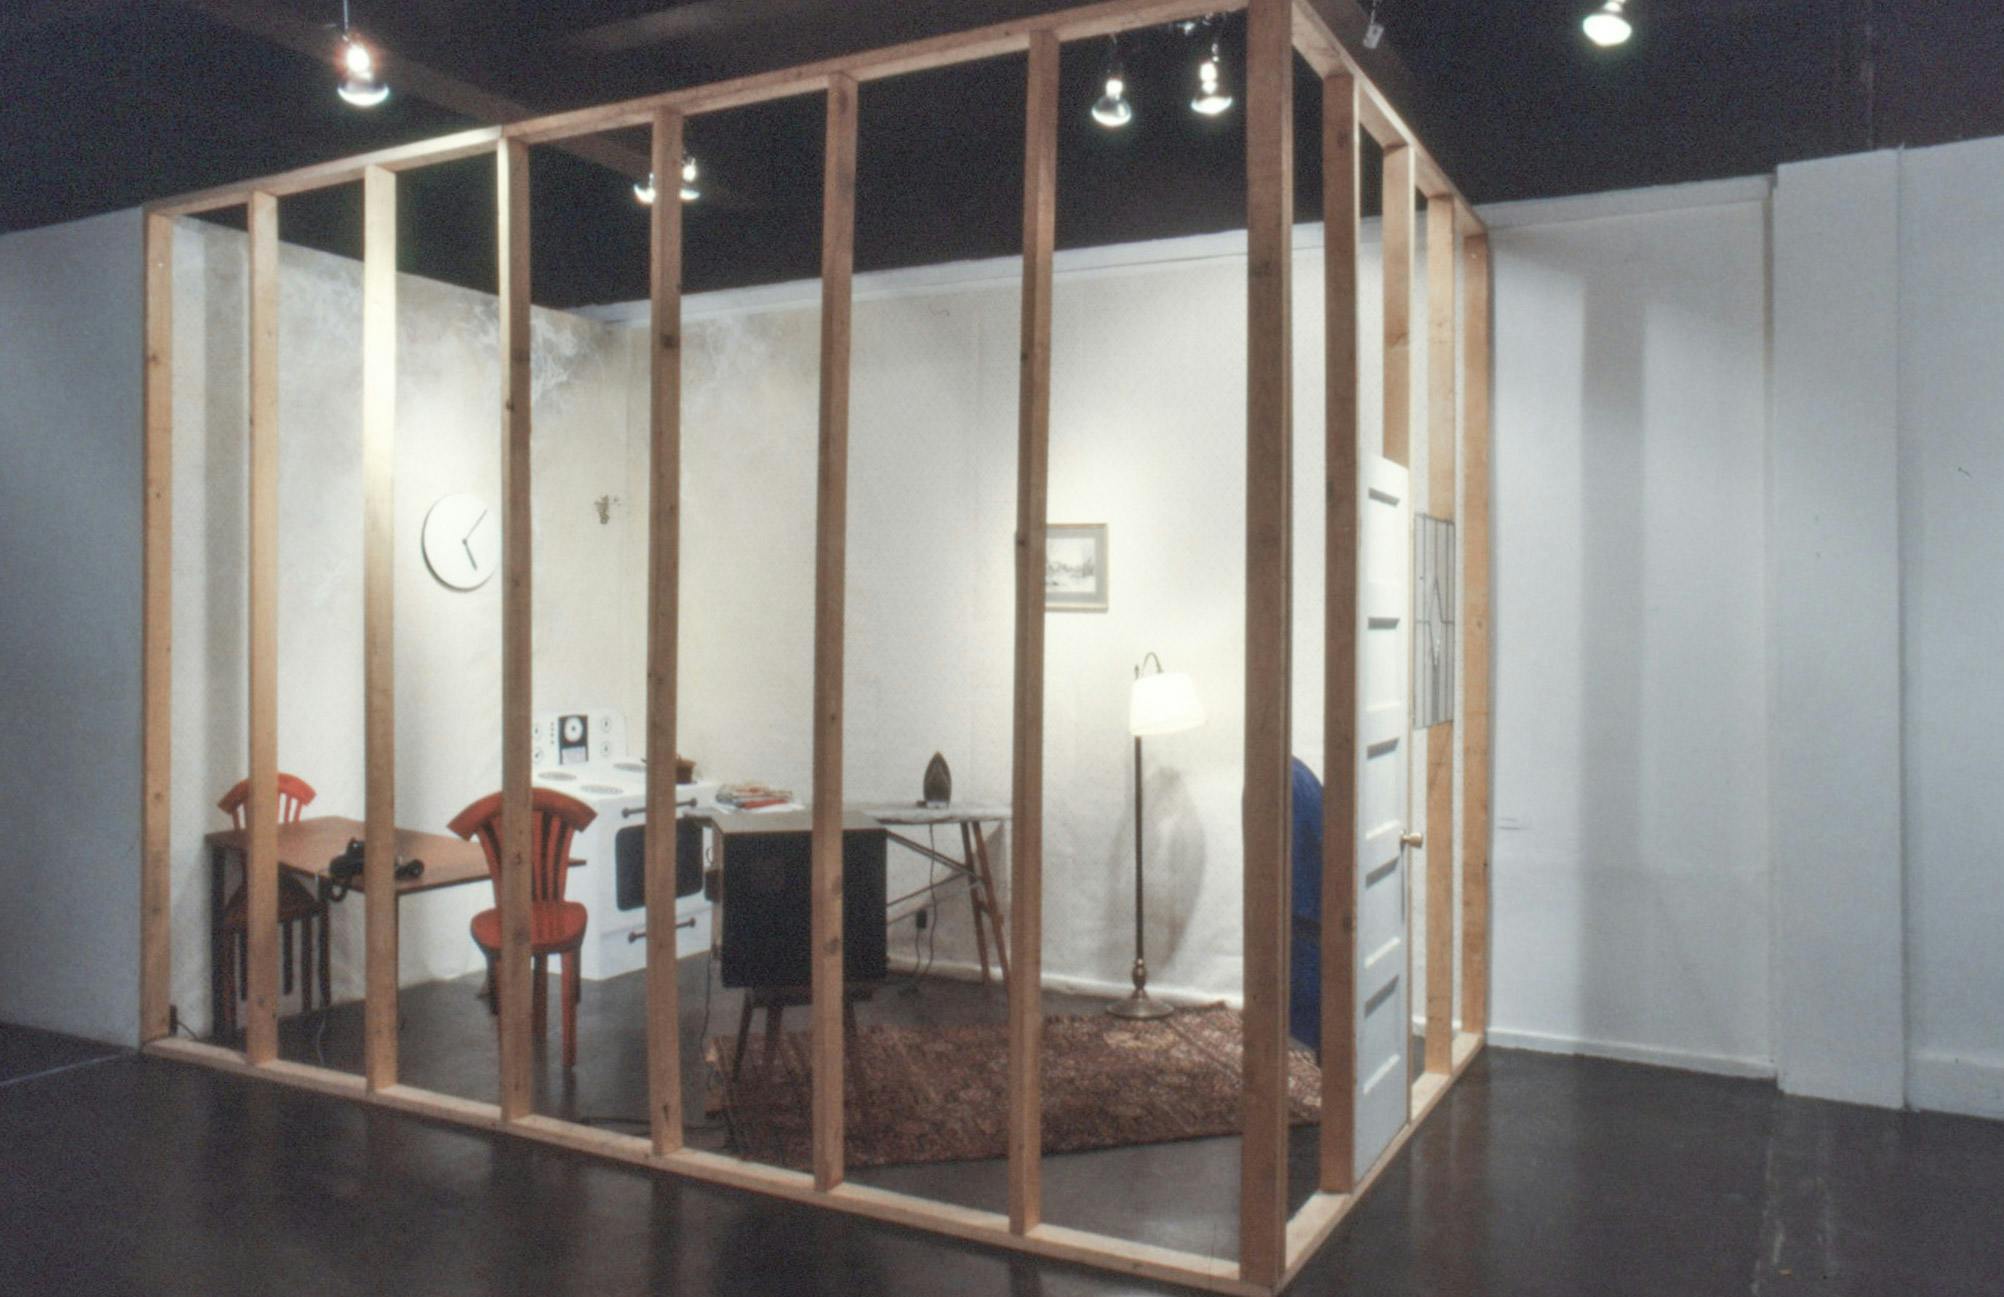 A closeup of an installation in a gallery. The installation resembles a living space with sculptures of various items including a TV, a stove, chairs, an ironing board, a rug, and a lamp.